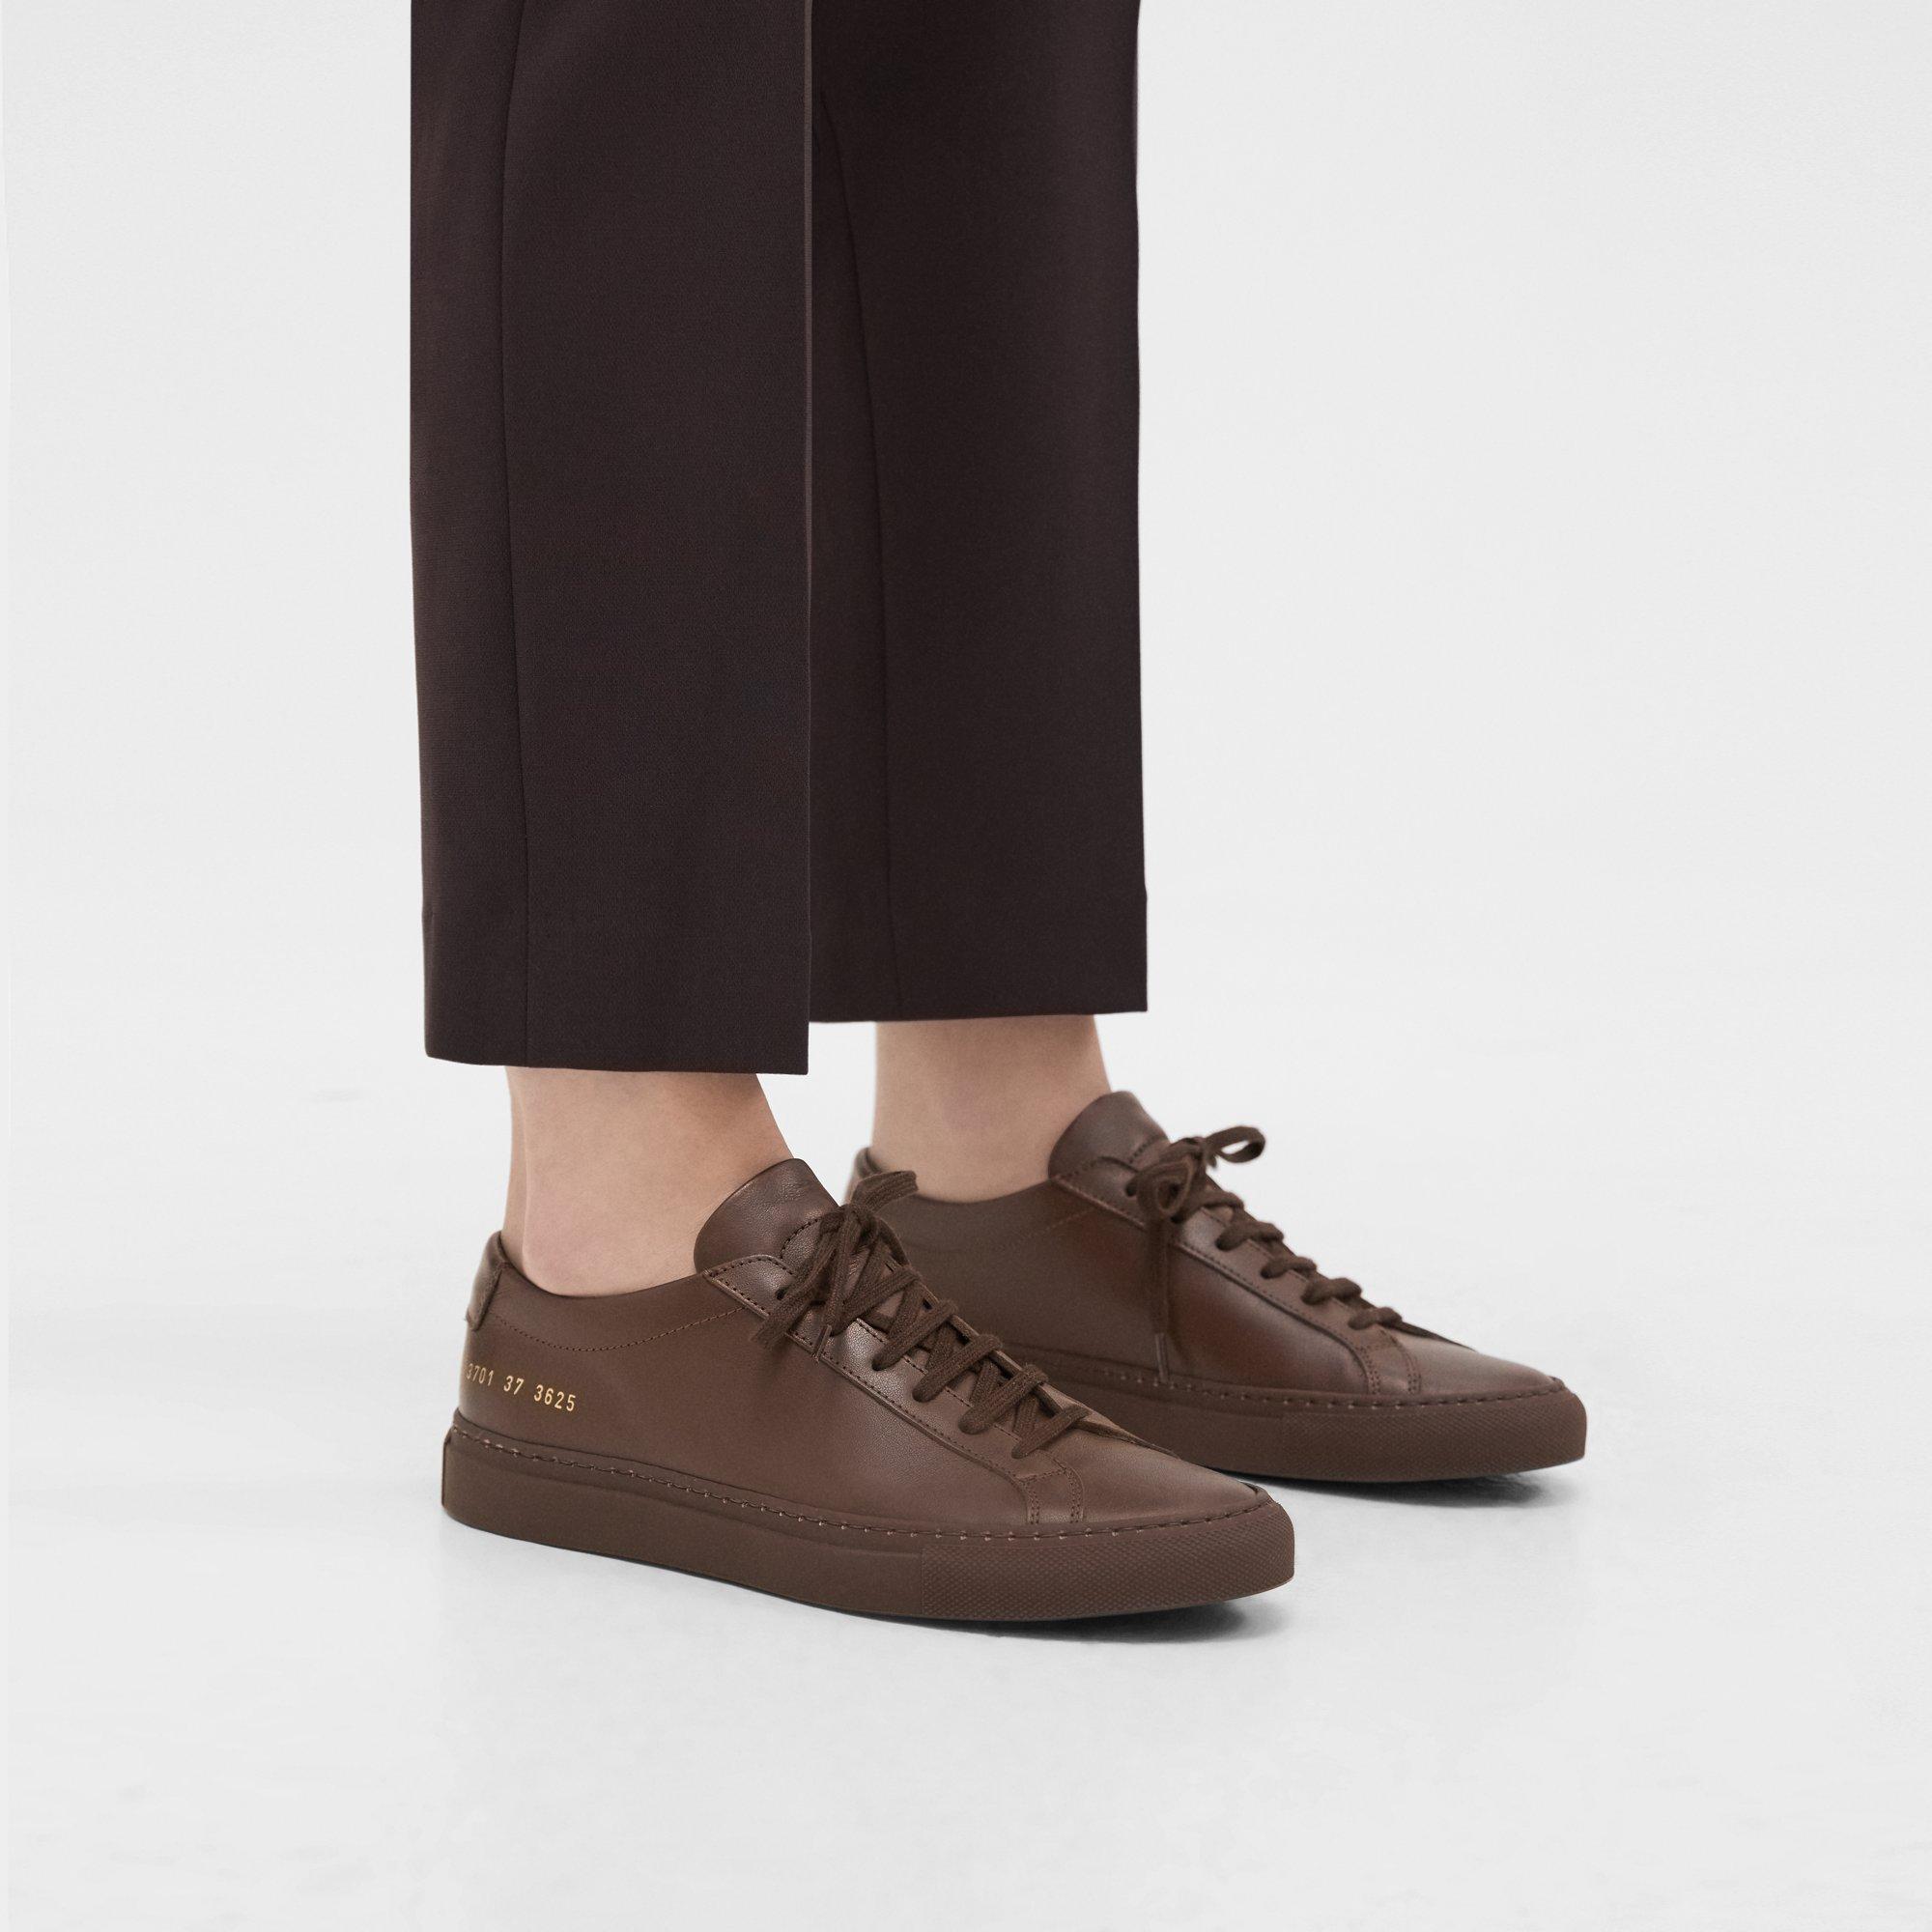 Theory Common Projects Women's Original Achilles Sneakers In Mocha